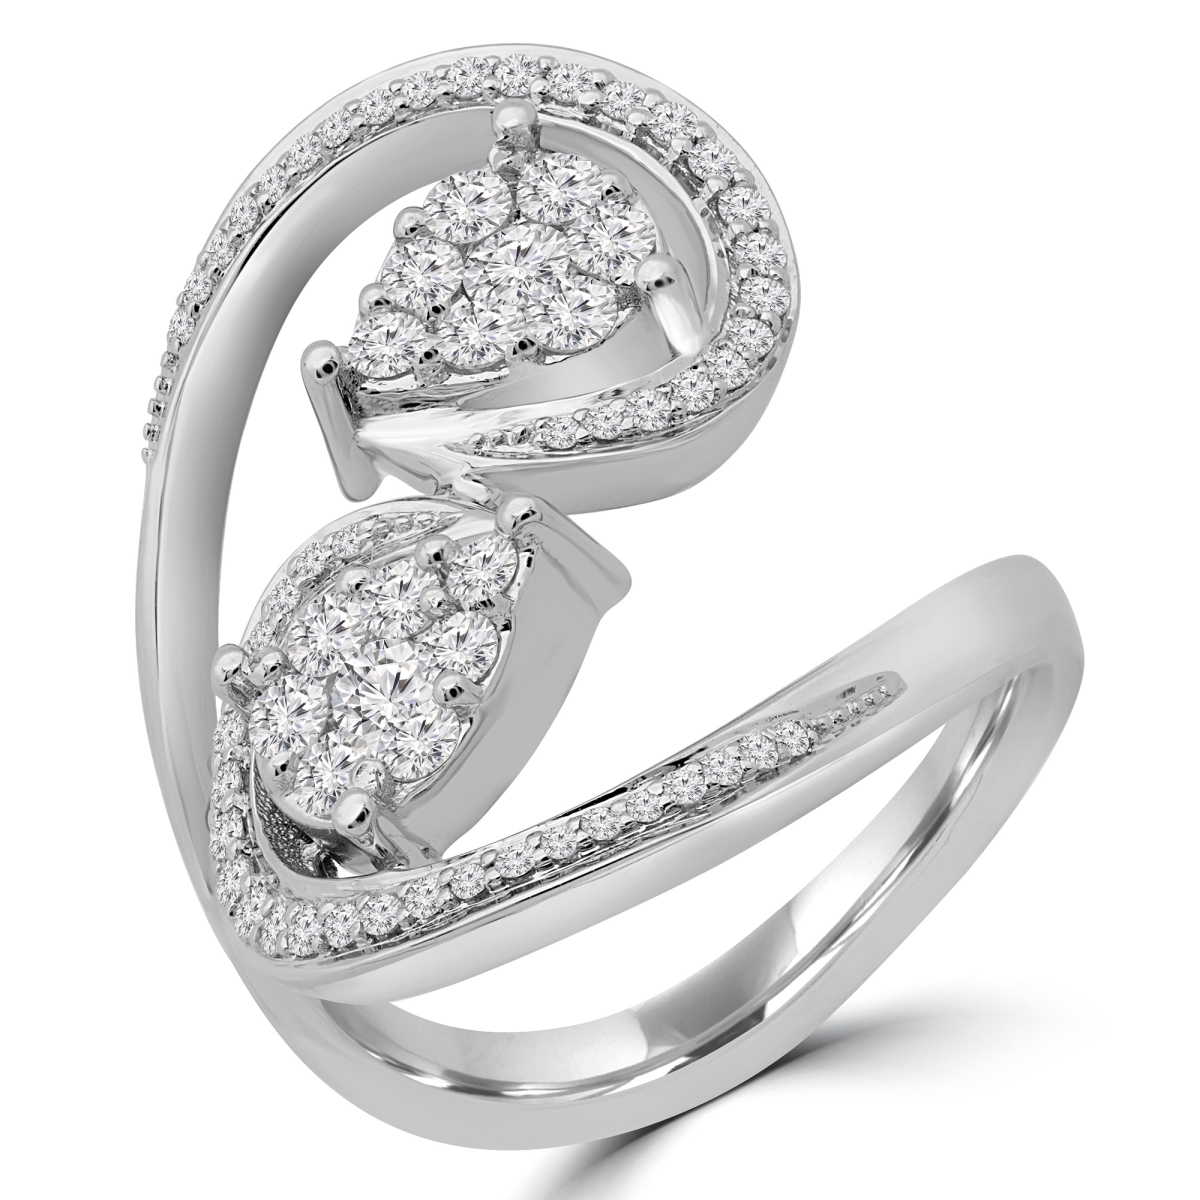 Picture of Majesty Diamonds MDR190070-3.5 0.67 CTW Round Diamond Swirl Pear Cluster Ring in 14K White Gold - Size 3.5